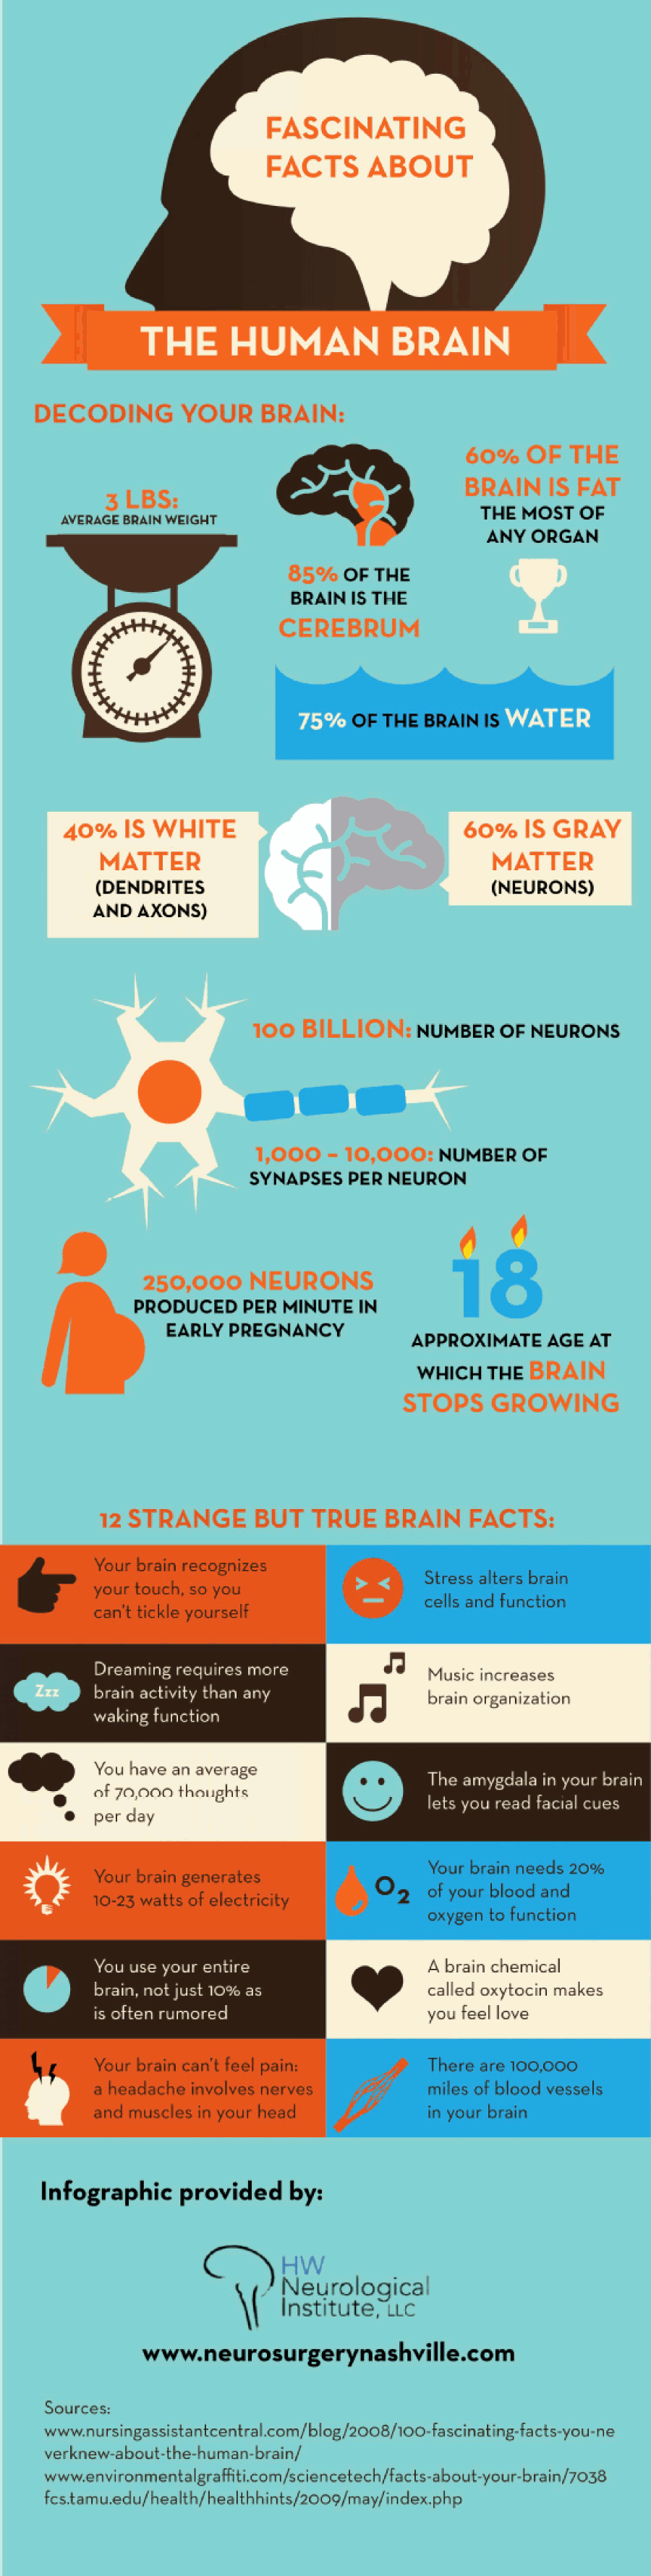 Fascinating Facts About the Human Brain